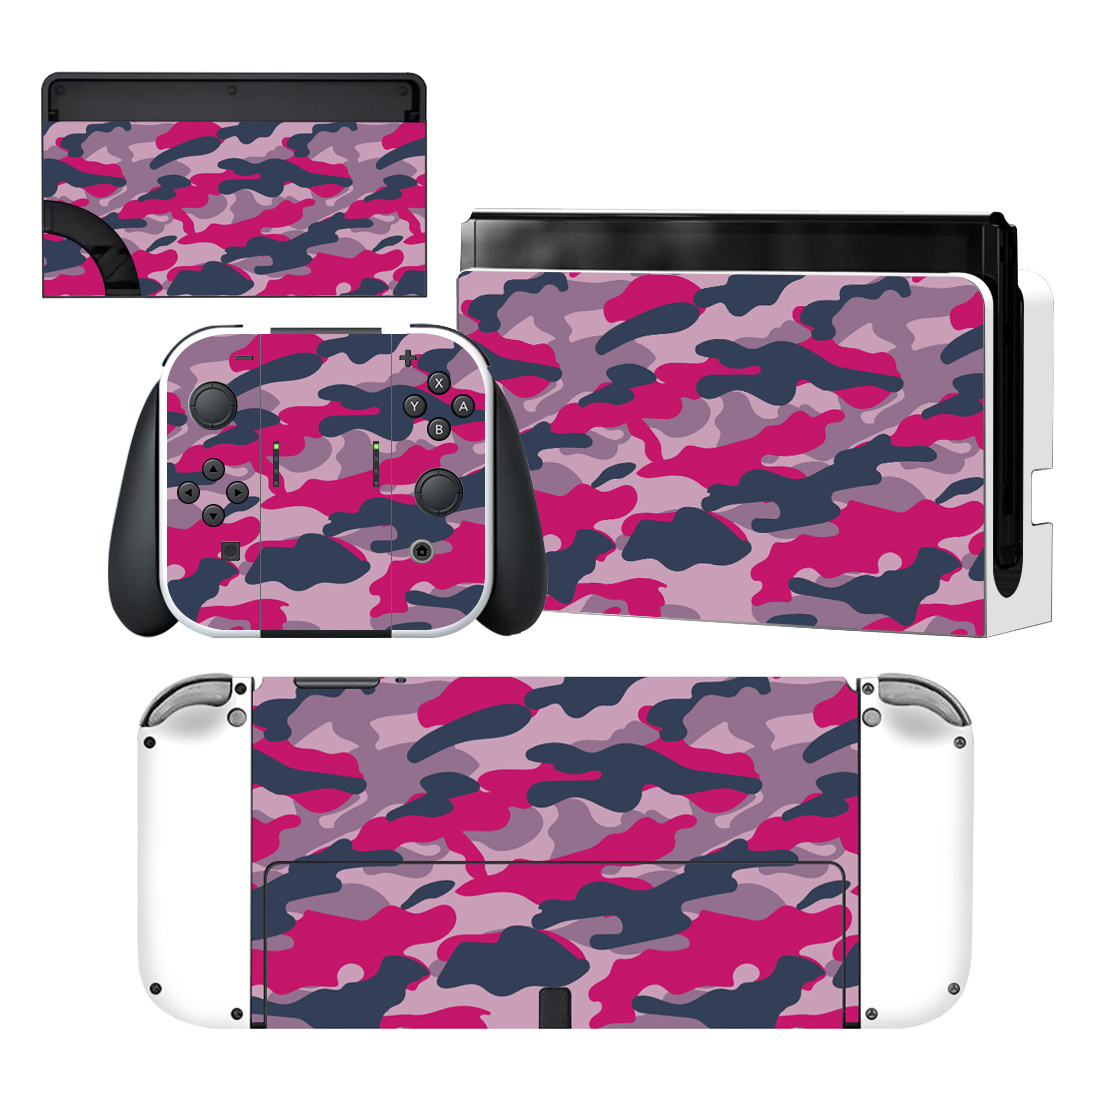 Colorful Camouflage Nintendo Switch OLED Skin Sticker Decal